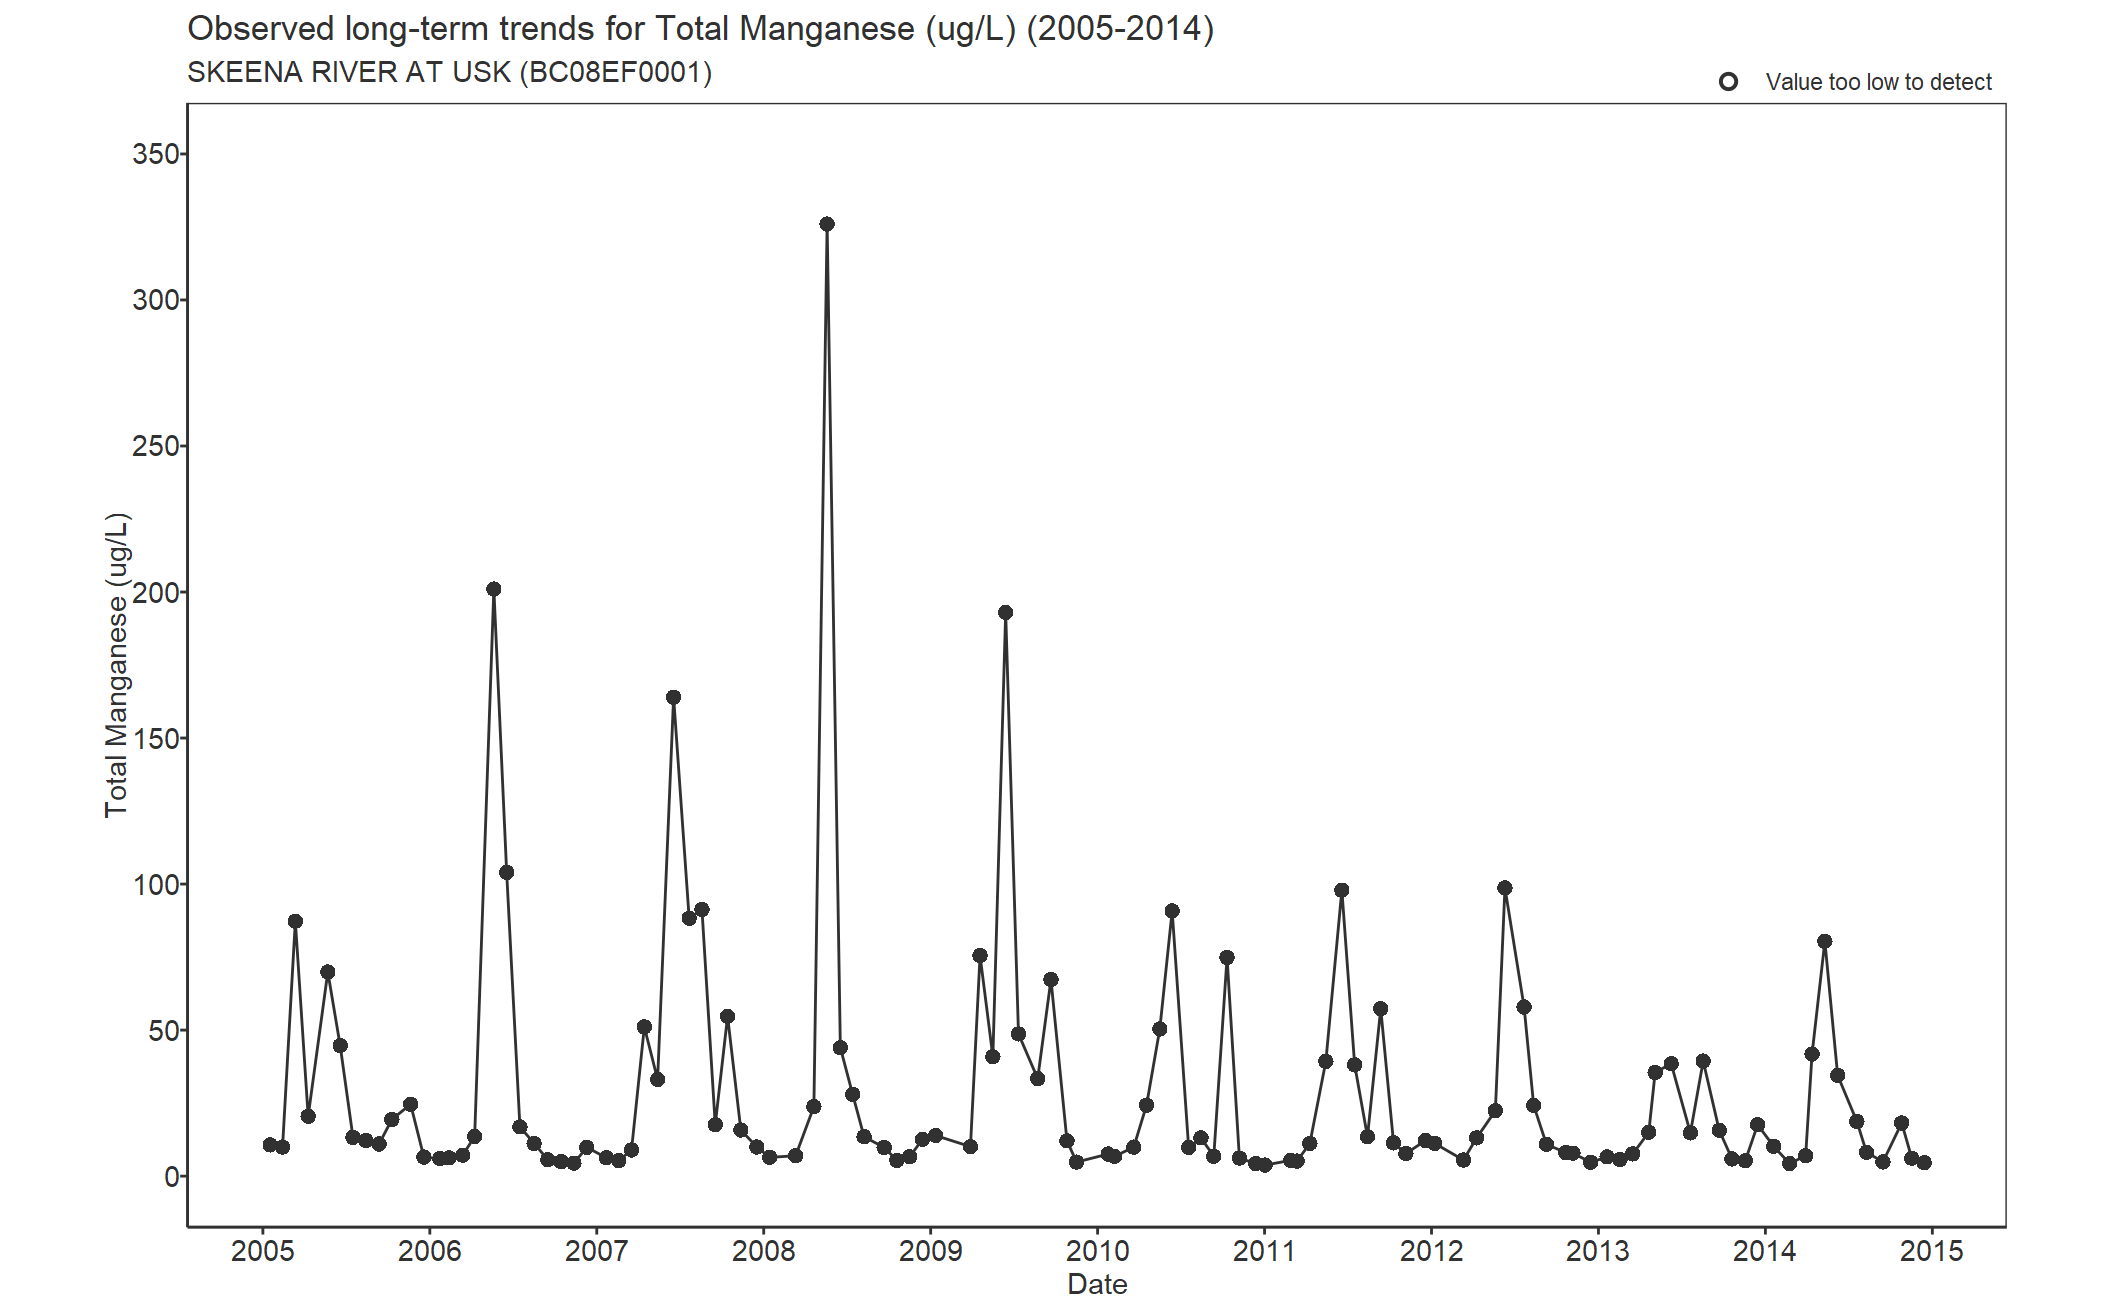 Observed long-term trends for Total Manganese (2005-2014)